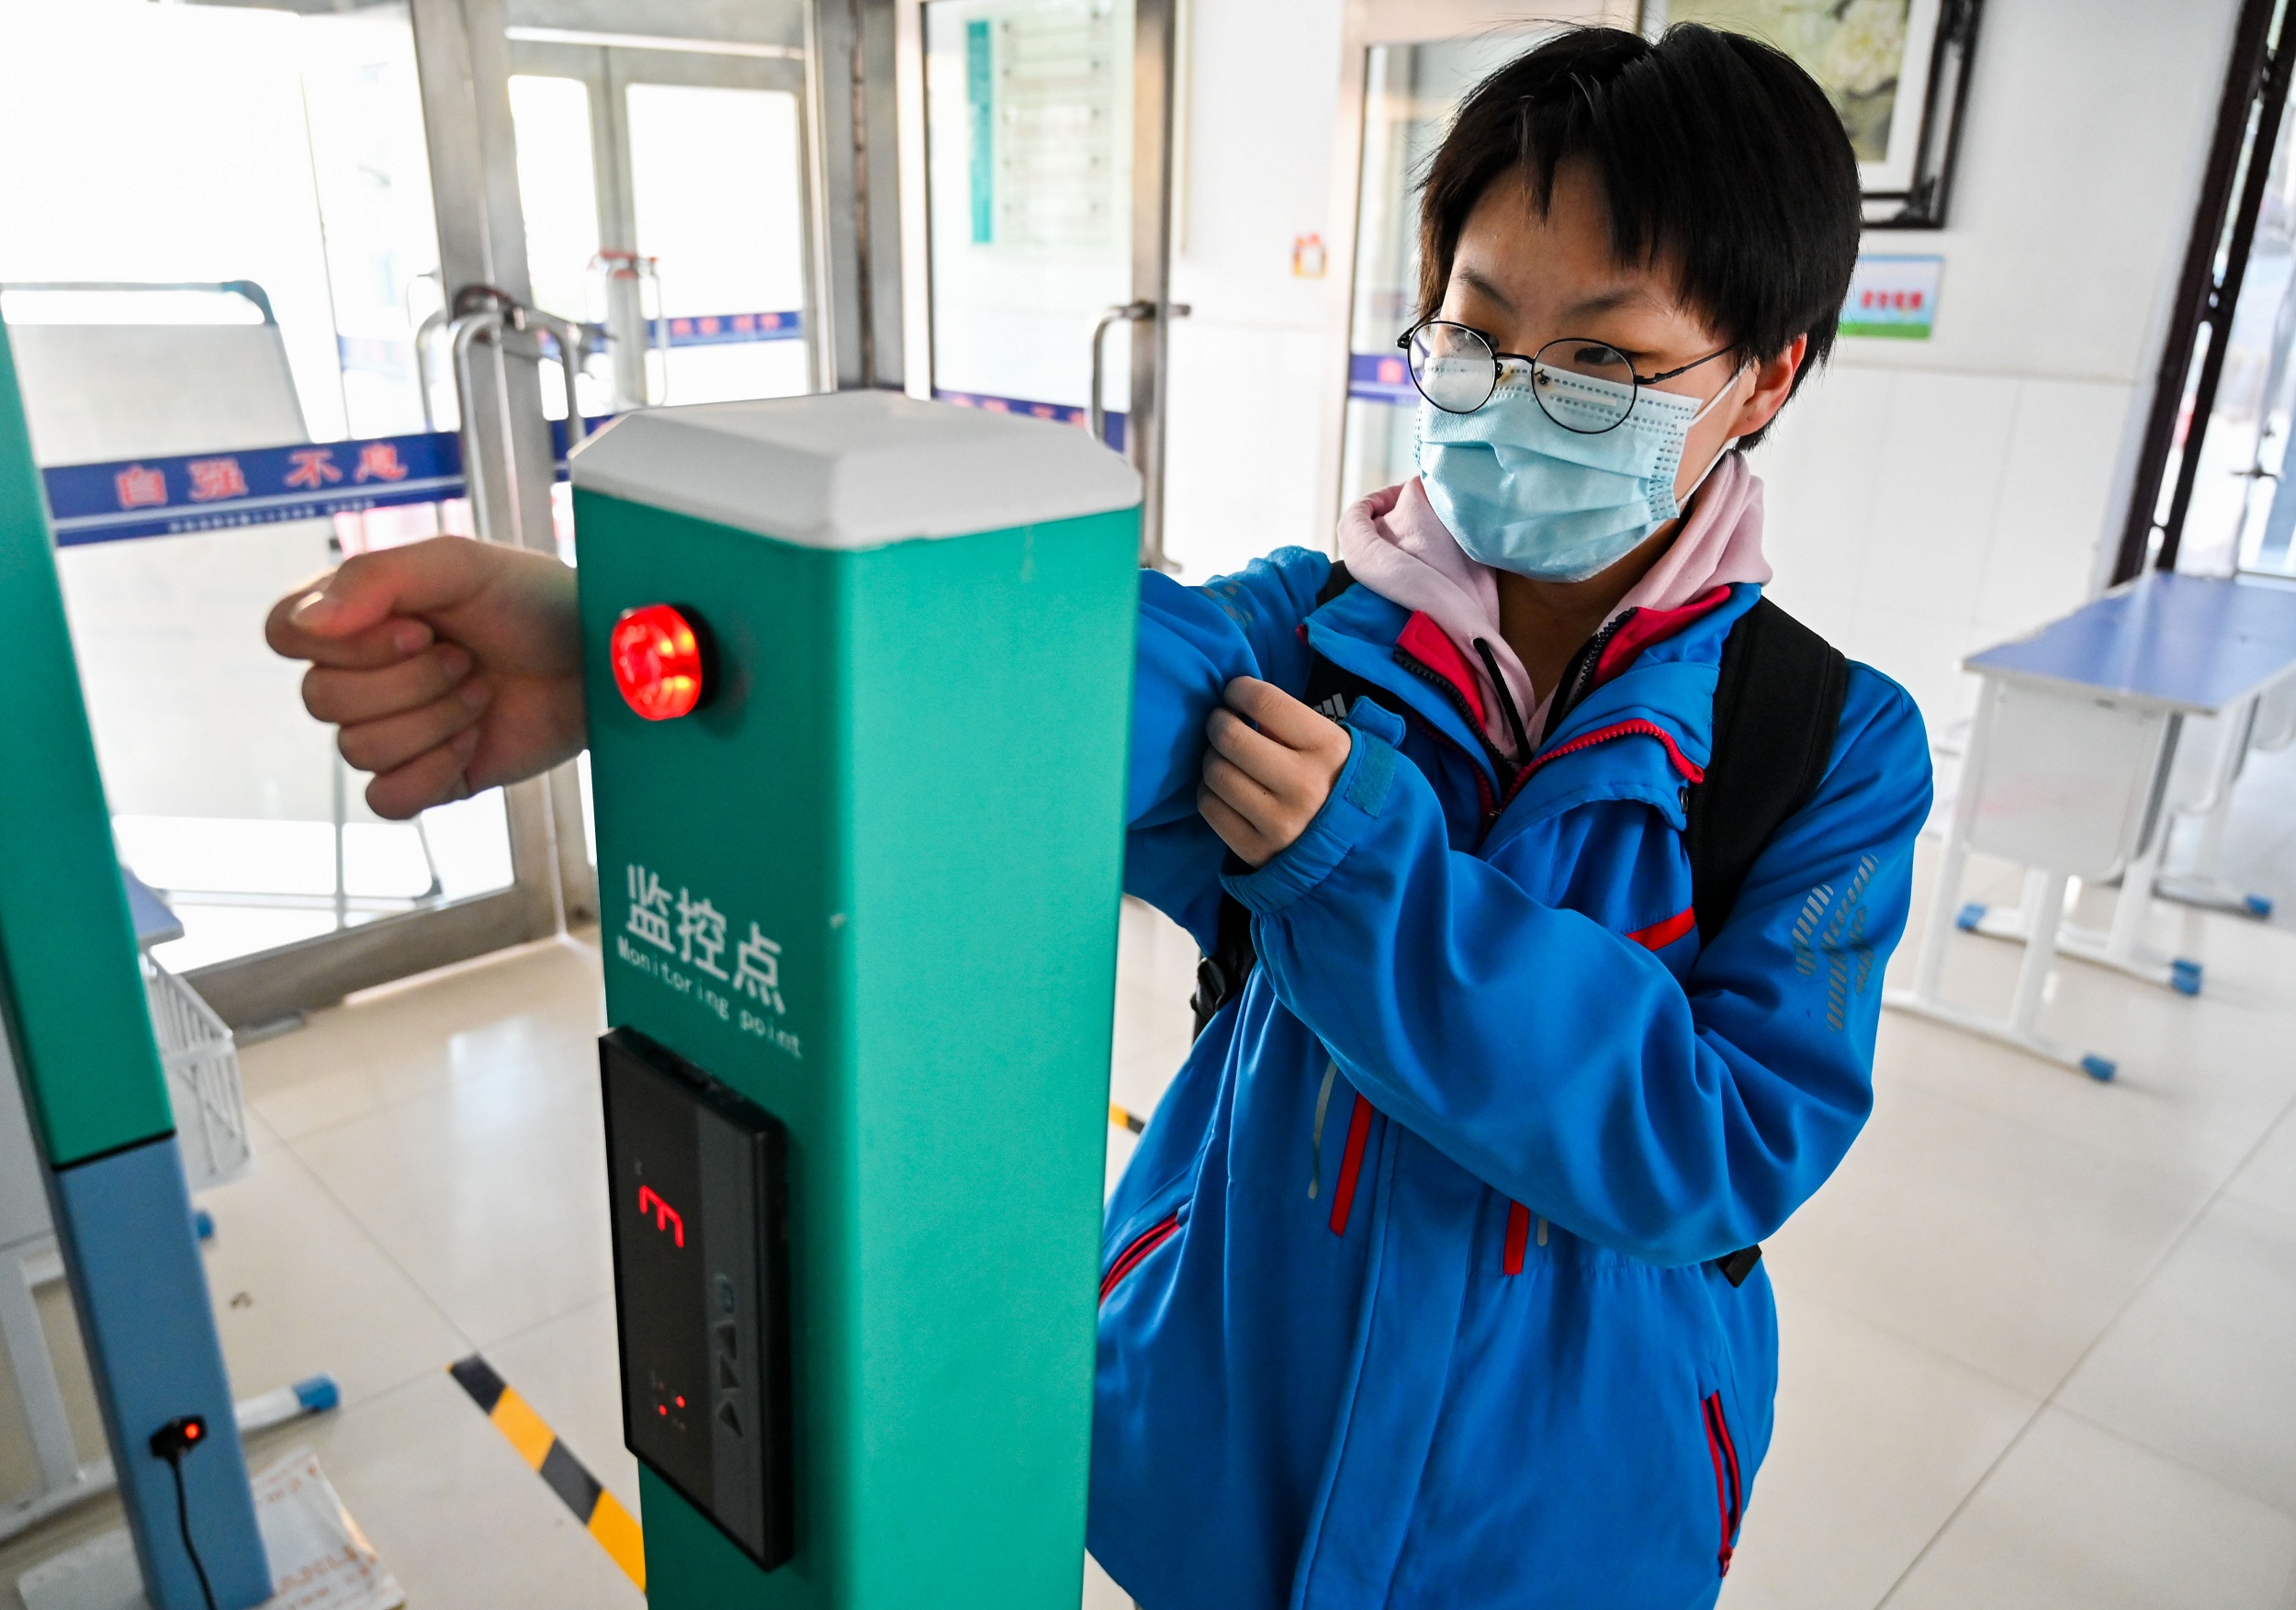 A graduating student gets temperature checked at the entrance of the school building